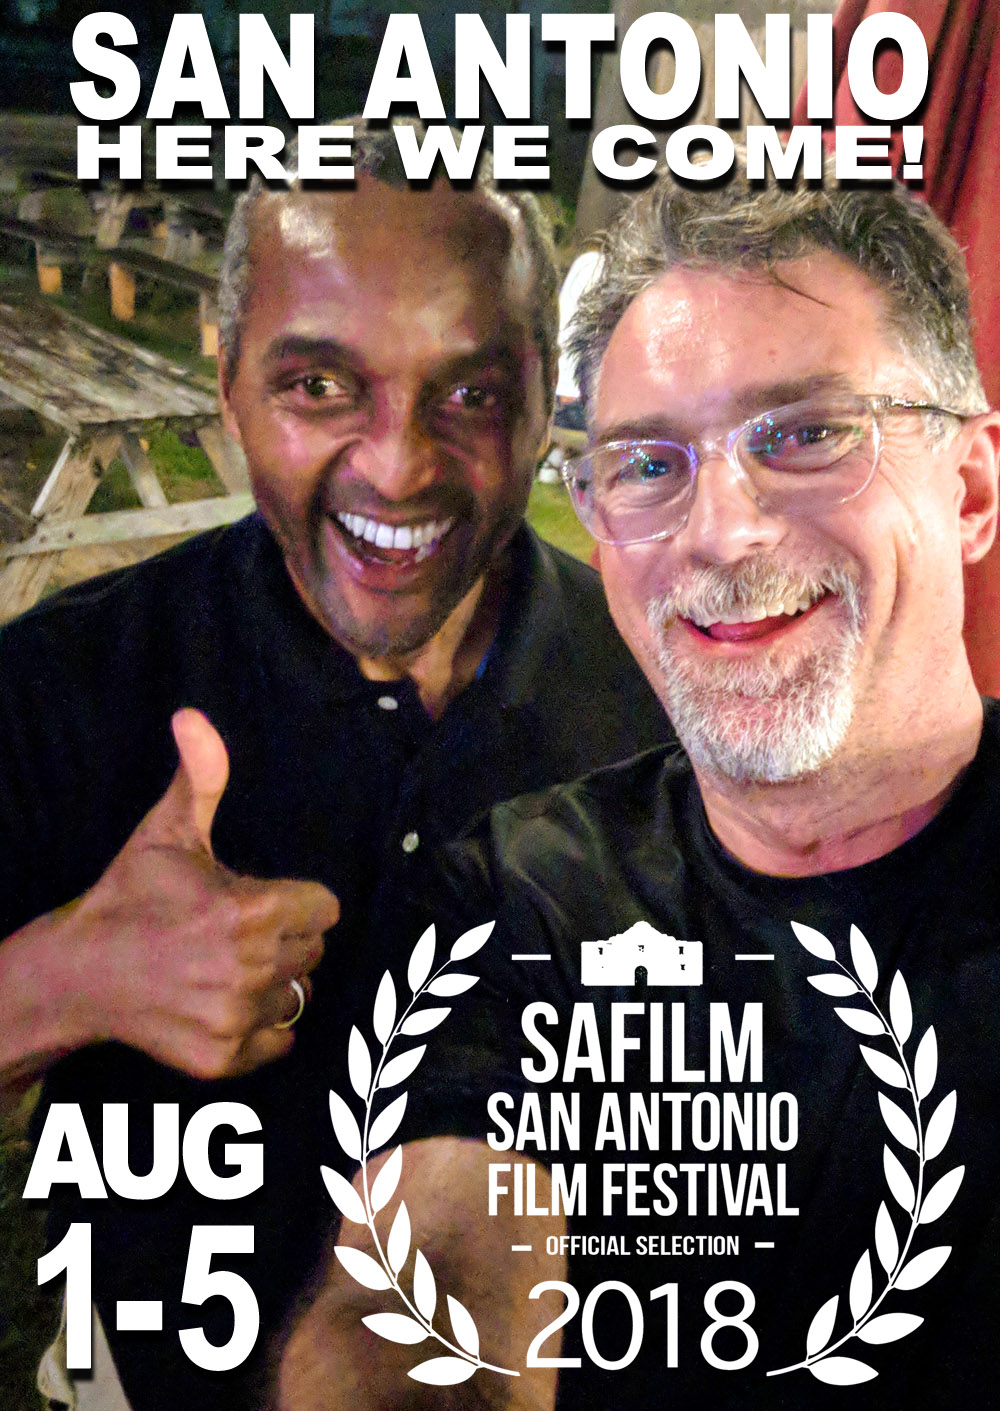 EP Steve Harris and Director J Matt Wallace get the news about the San Antonio Film Festival Selection